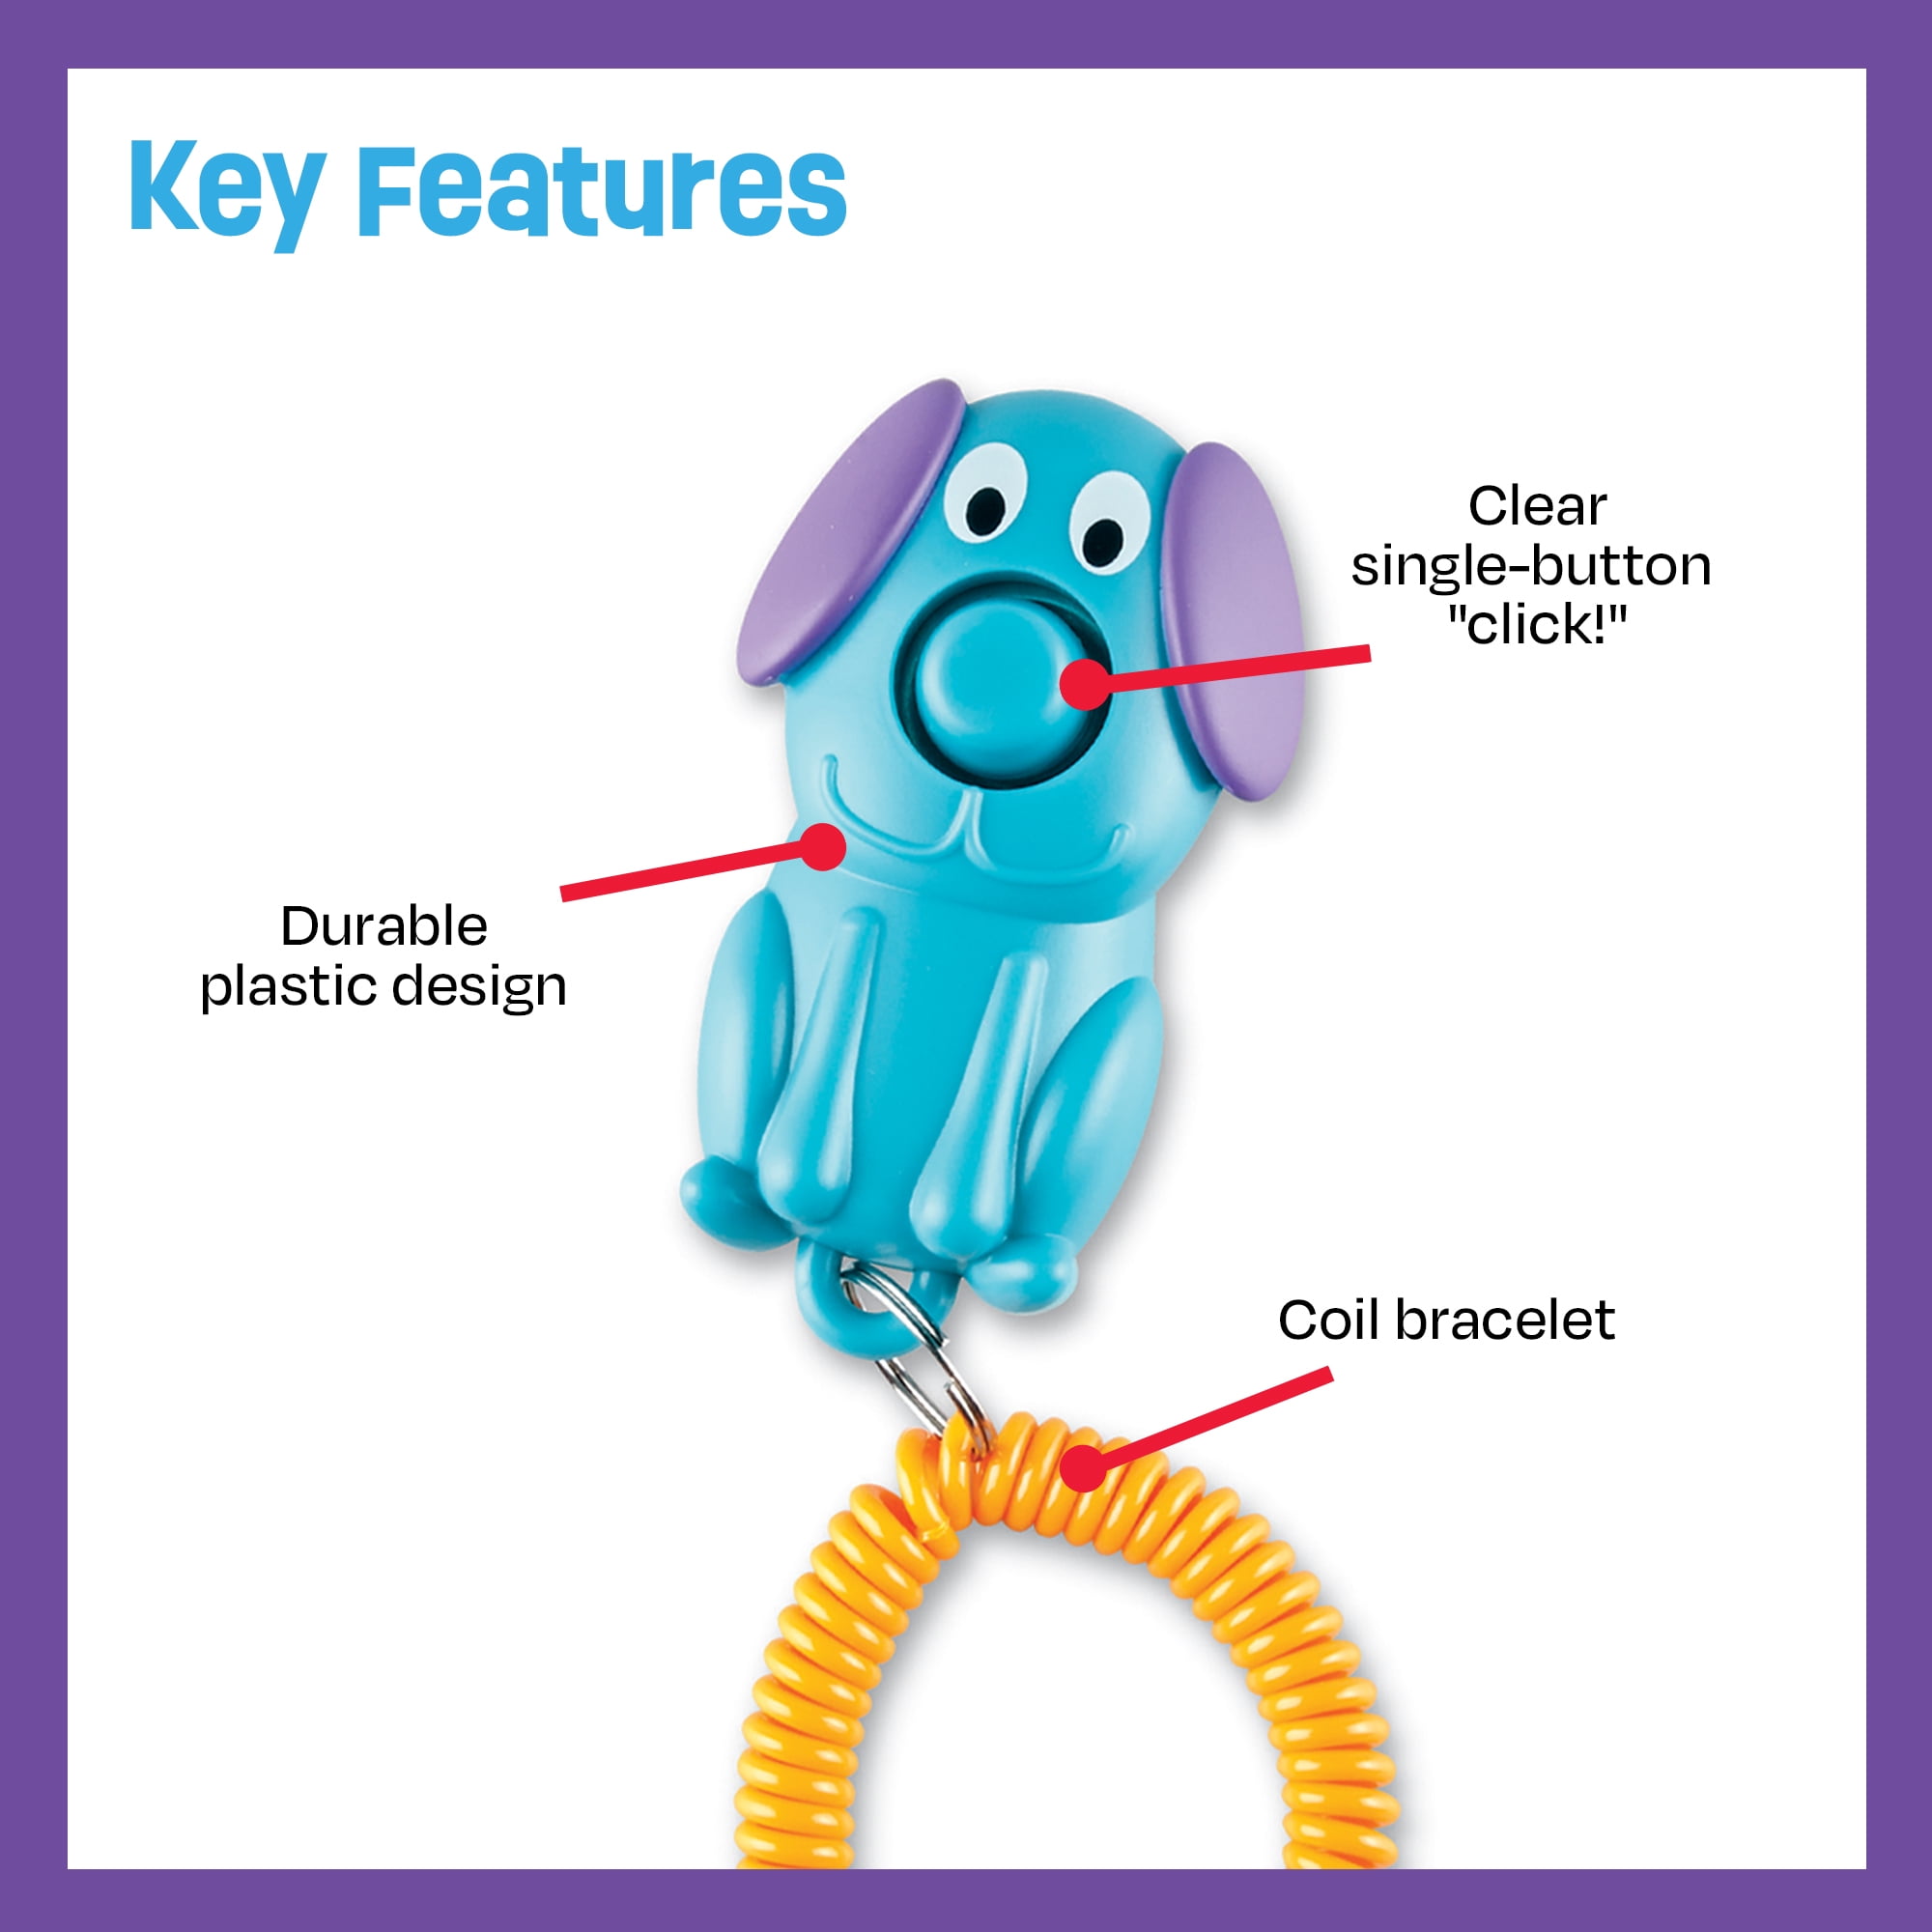 Smarty Pooch Training Clickers - Hot Dog